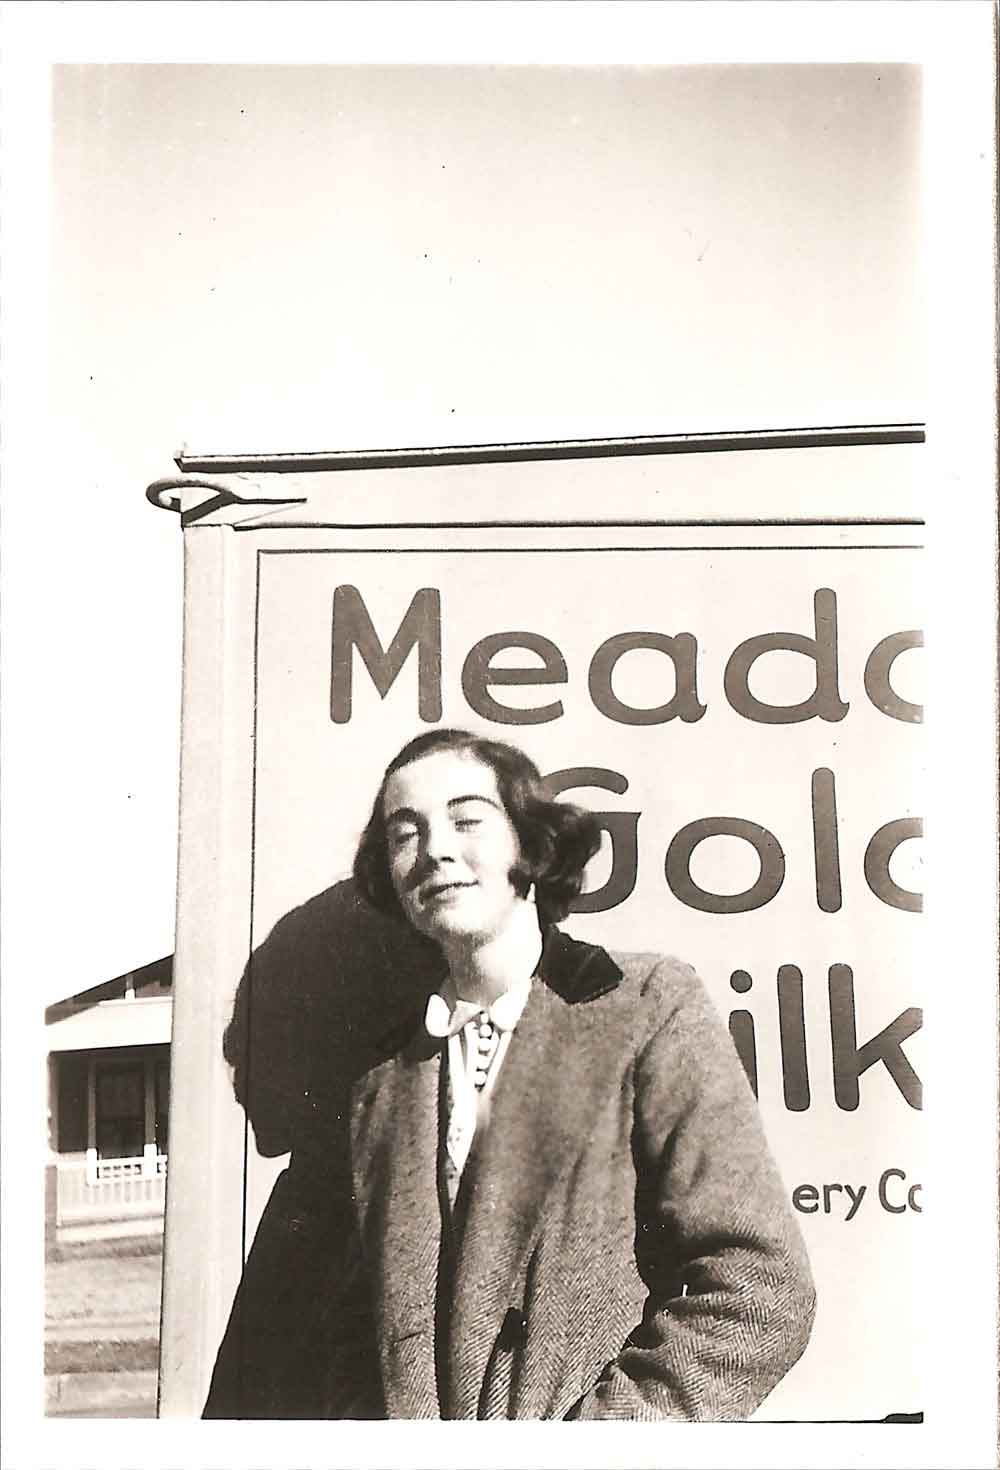 (HTC.2010.8.24) - Phyllis Hightower near Meadow Gold Milk Delivery Truck, c. mid-1930s